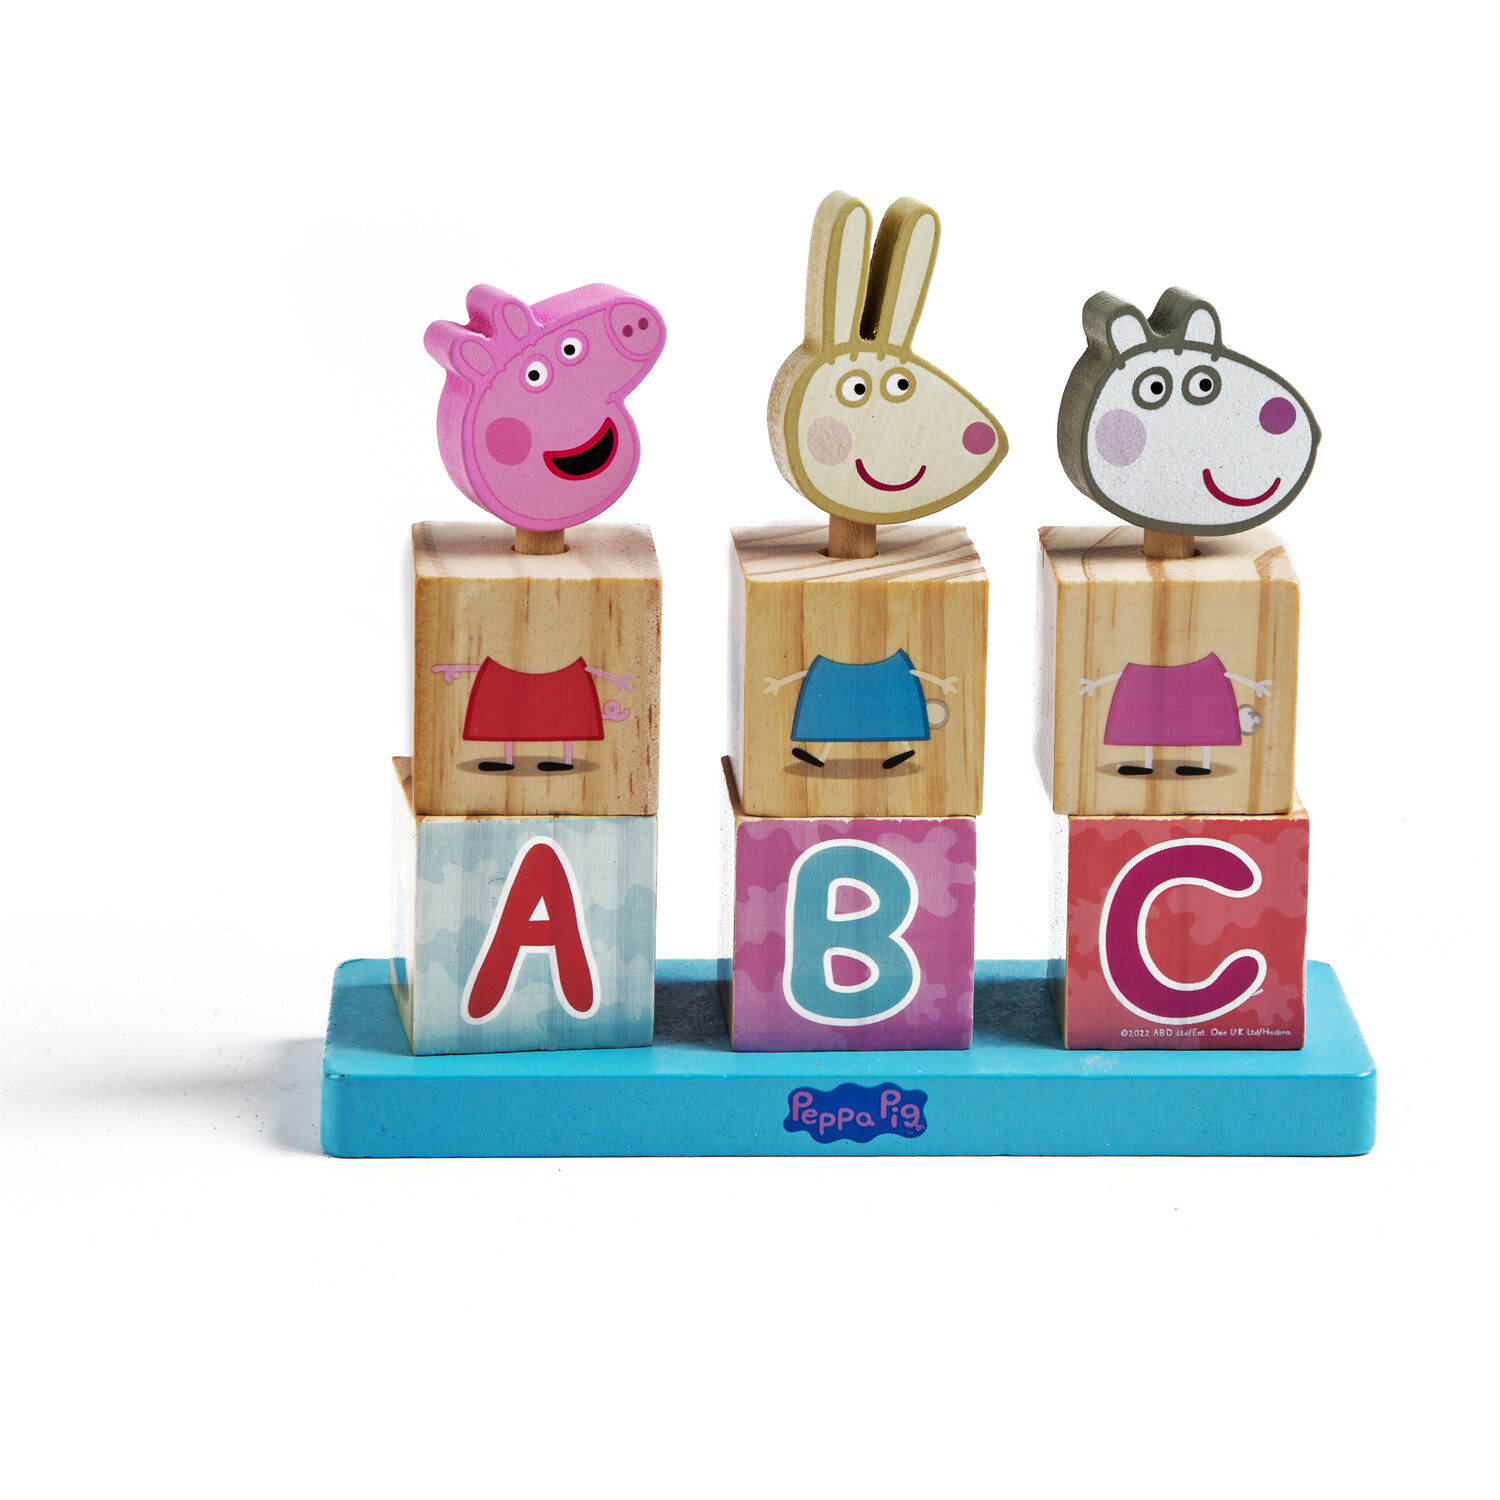 Peppa Pig Blue Wooden Stacking Puzzle Toy Image 3